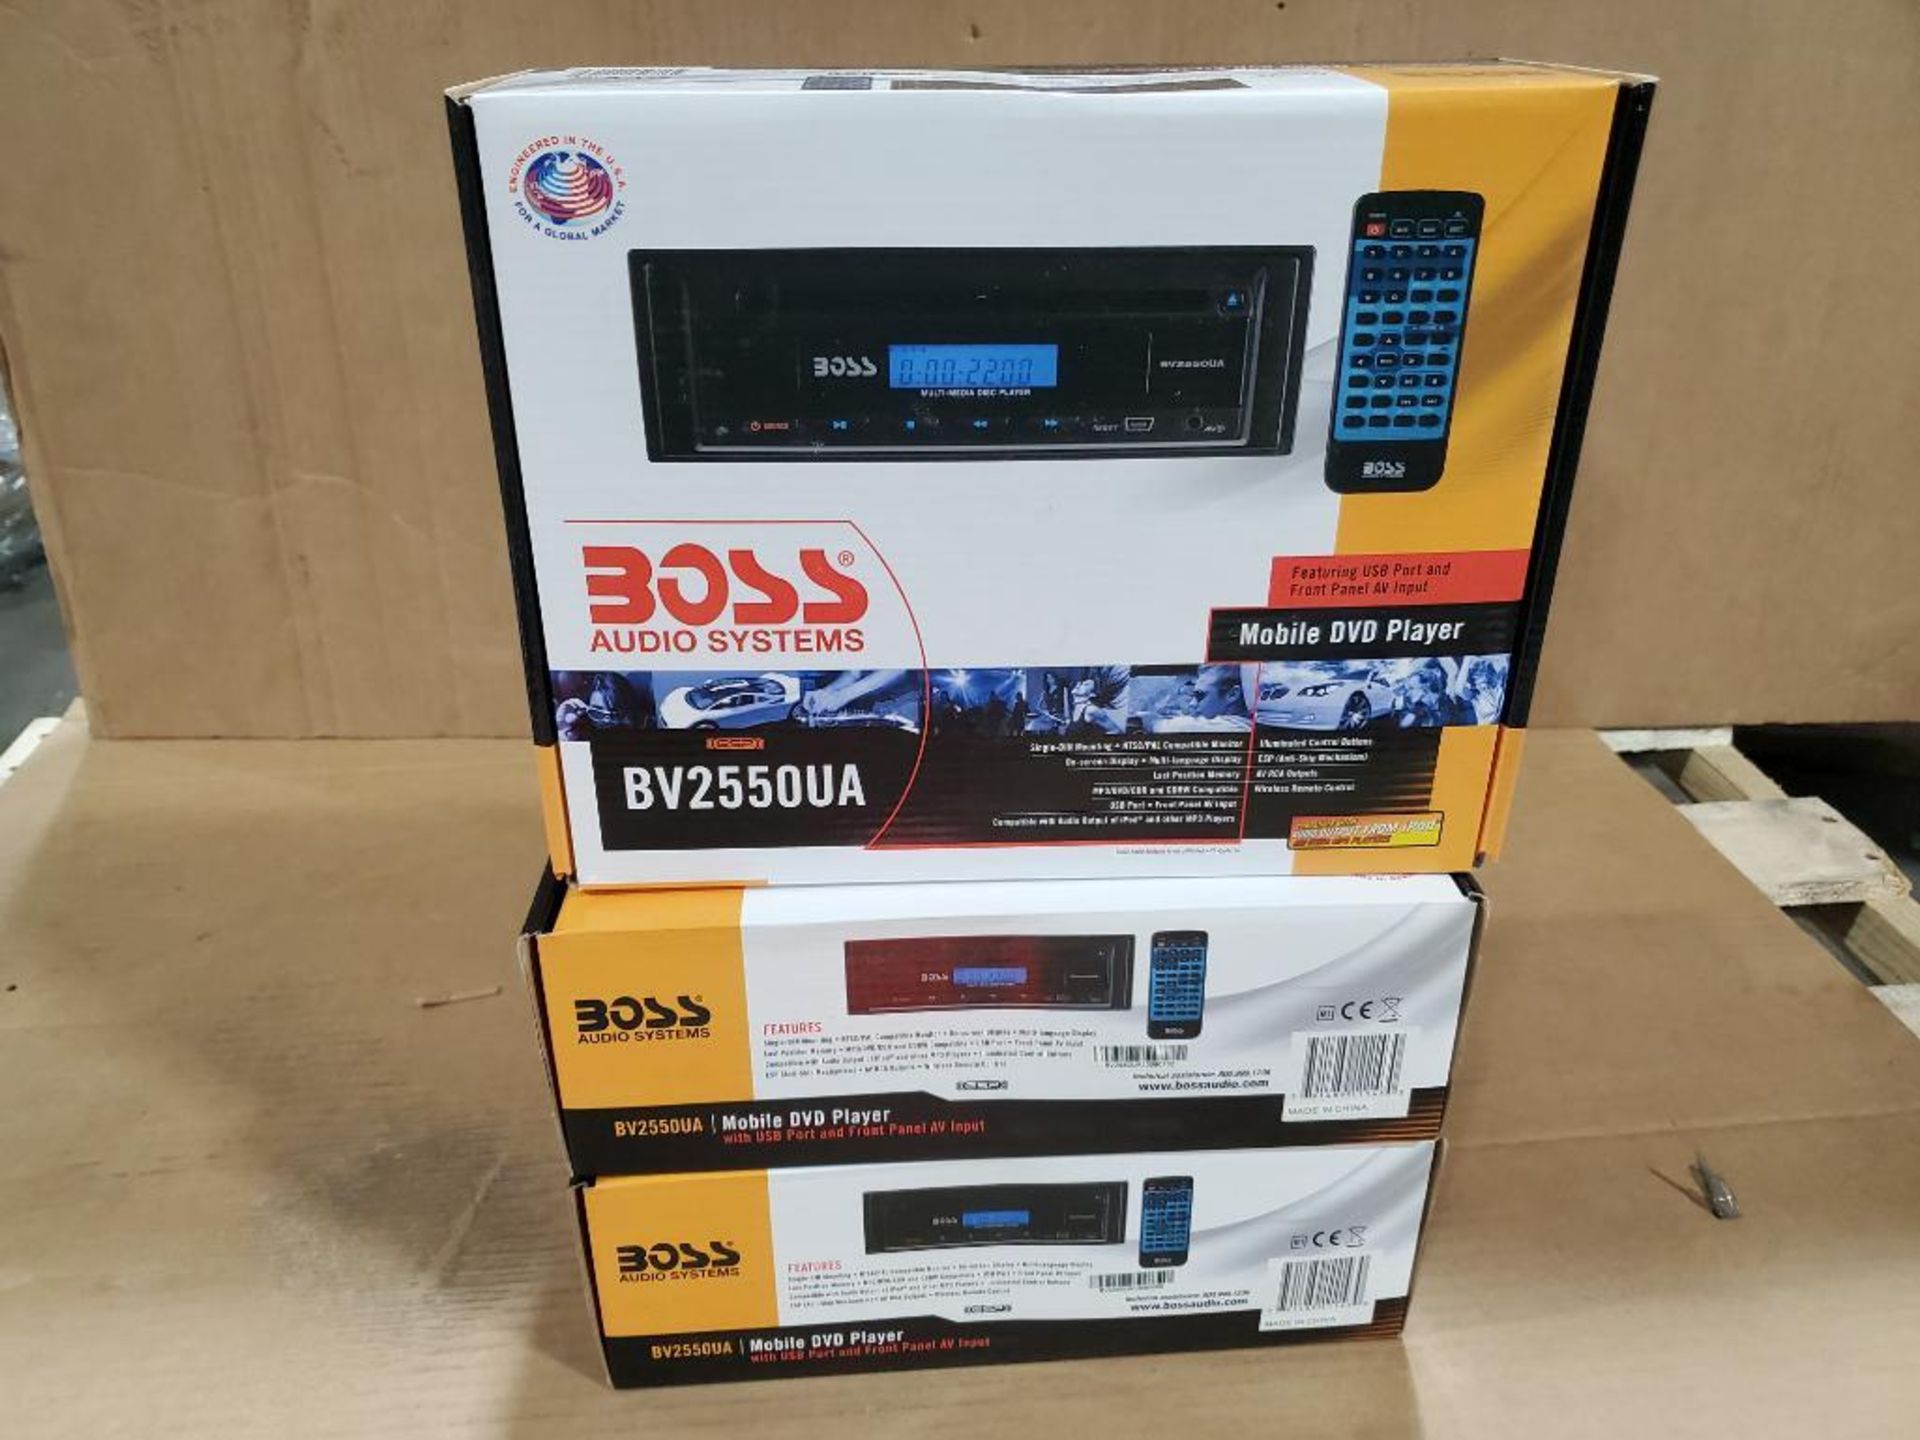 Qty 3 - Boss Audo Systems mobile DVD player. BV255OUA.